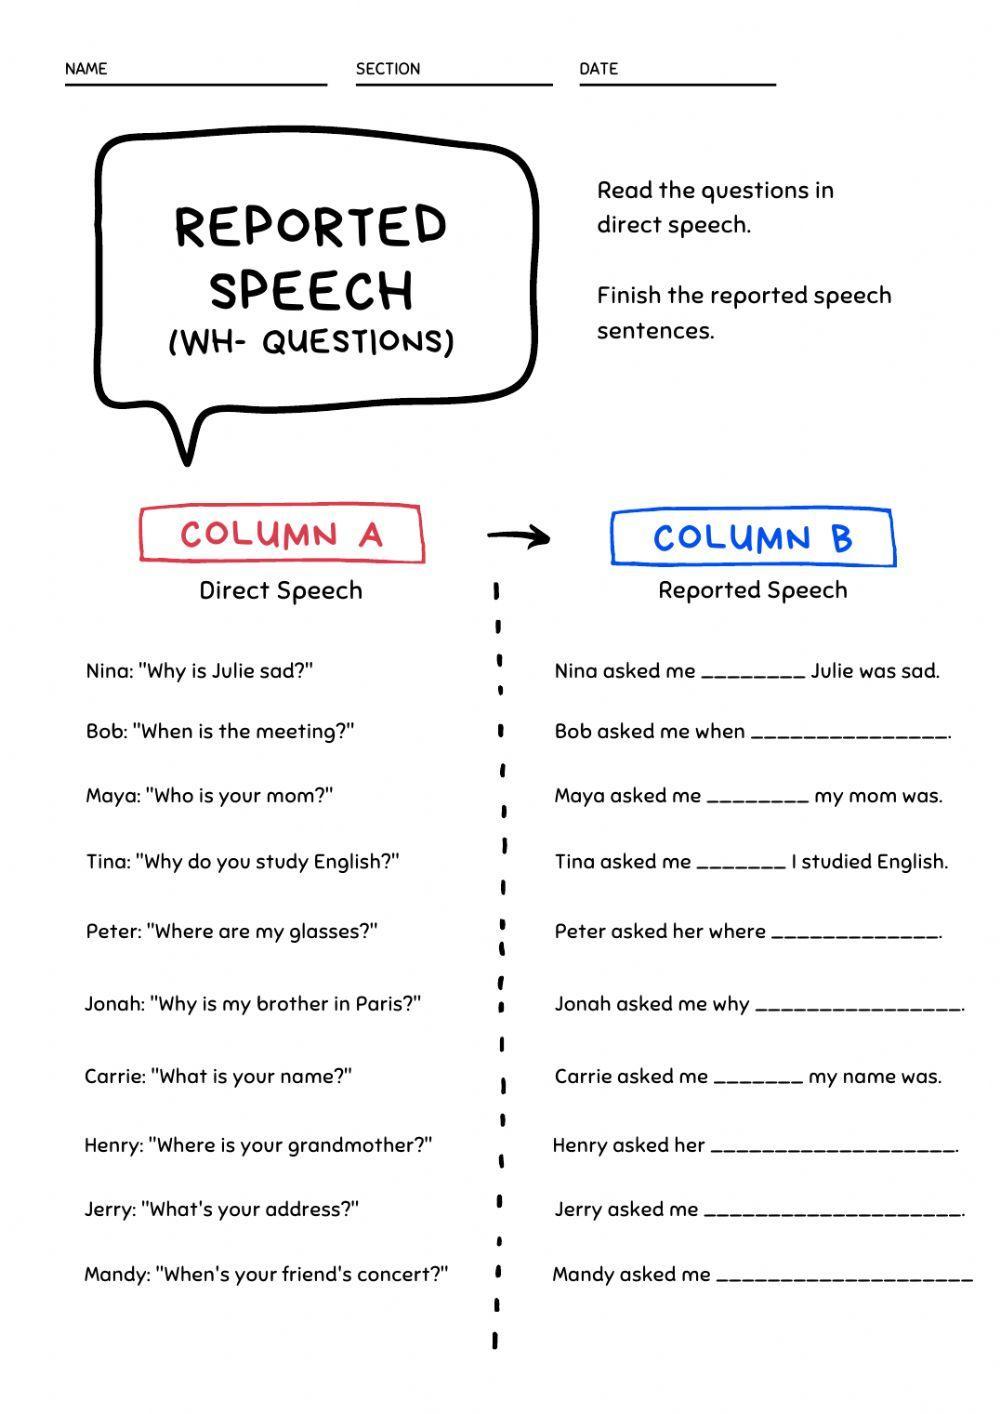 Reported Speech WH-QUESTIONS